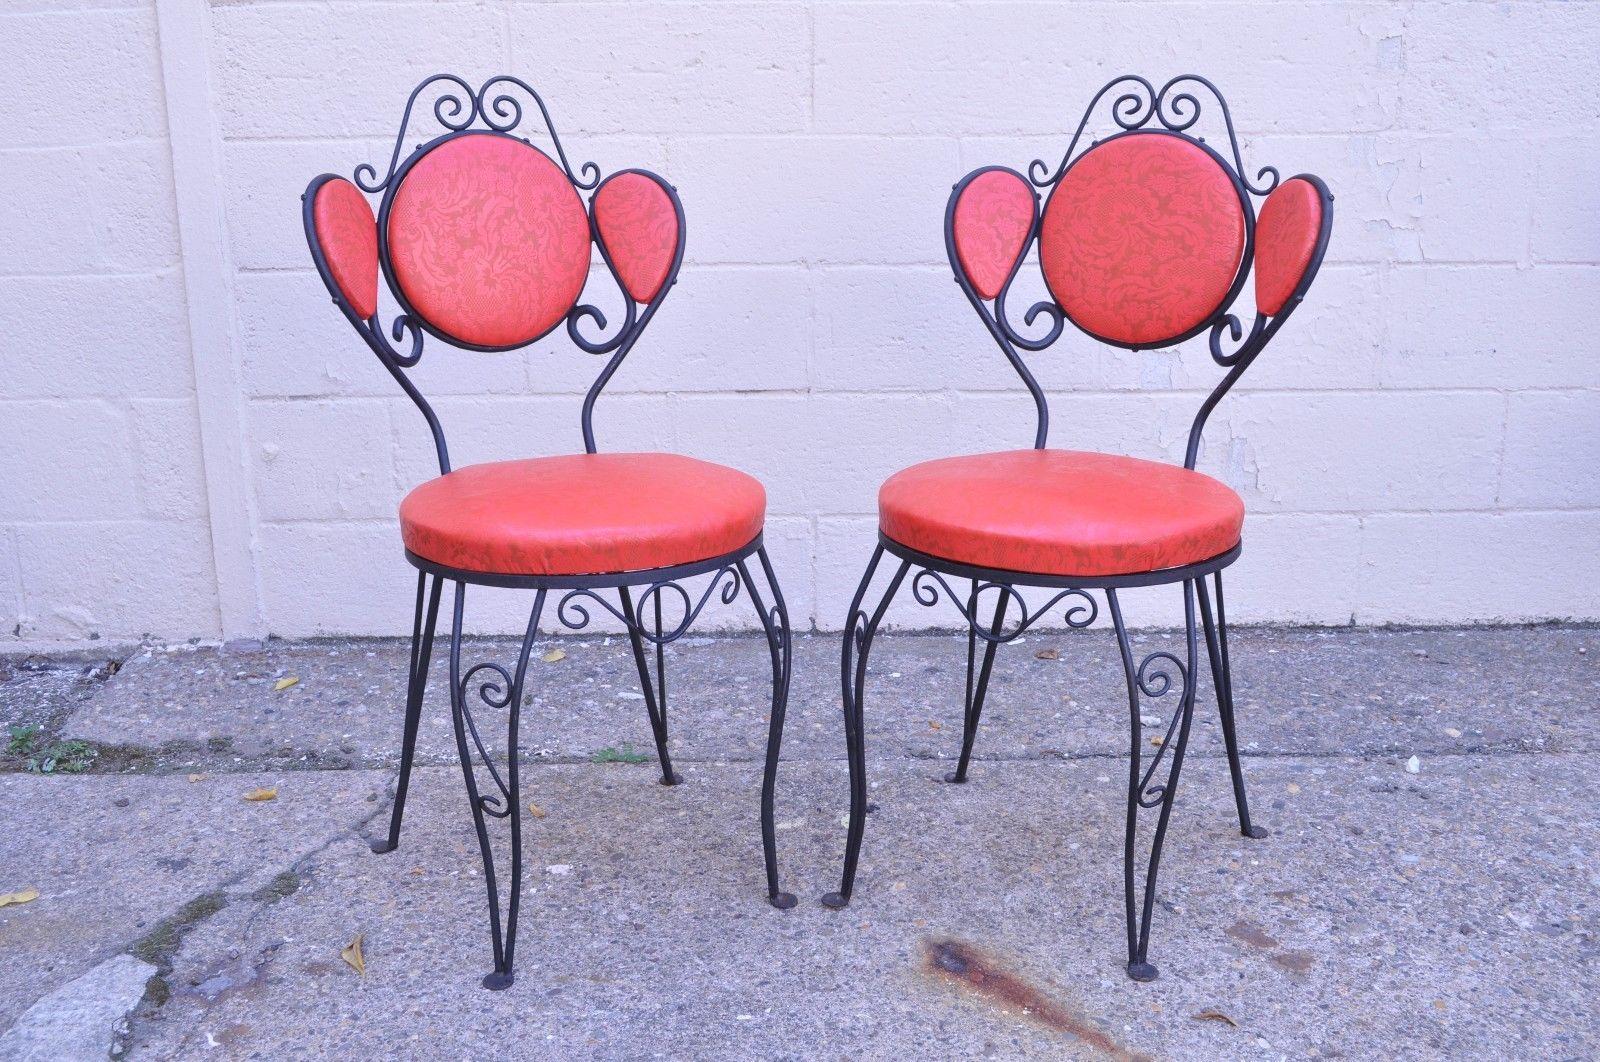 Set of six vintage Hollywood Regency wrought iron ice cream parlor dining chairs. Item features six side chairs, triple backs, scrolling wrought iron frames, red floral embossed vinyl upholstery, nailhead trim on backs, circa 1950s, American.